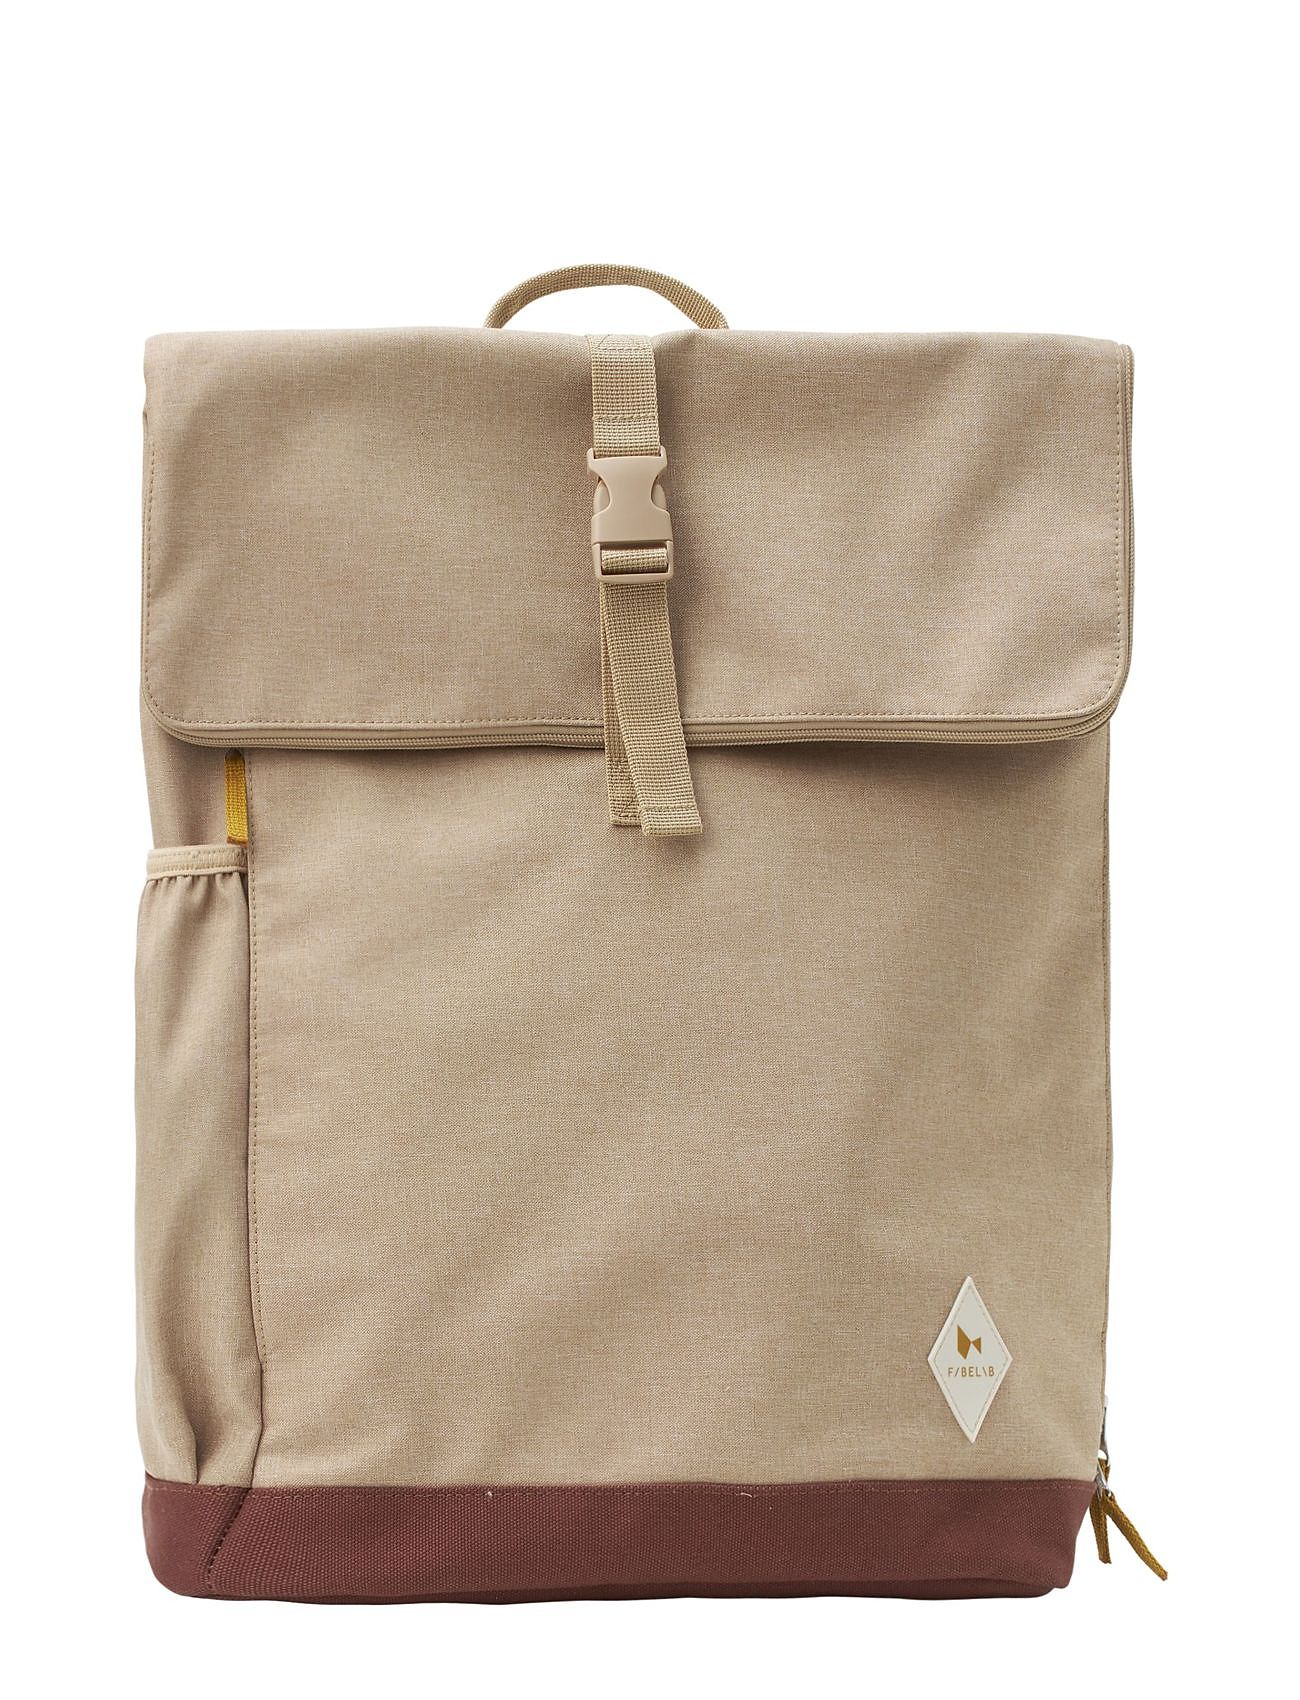 On-The-Go Parent Backpack - Caramel Baby & Maternity Care & Hygiene Changing Bags Beige Fabelab